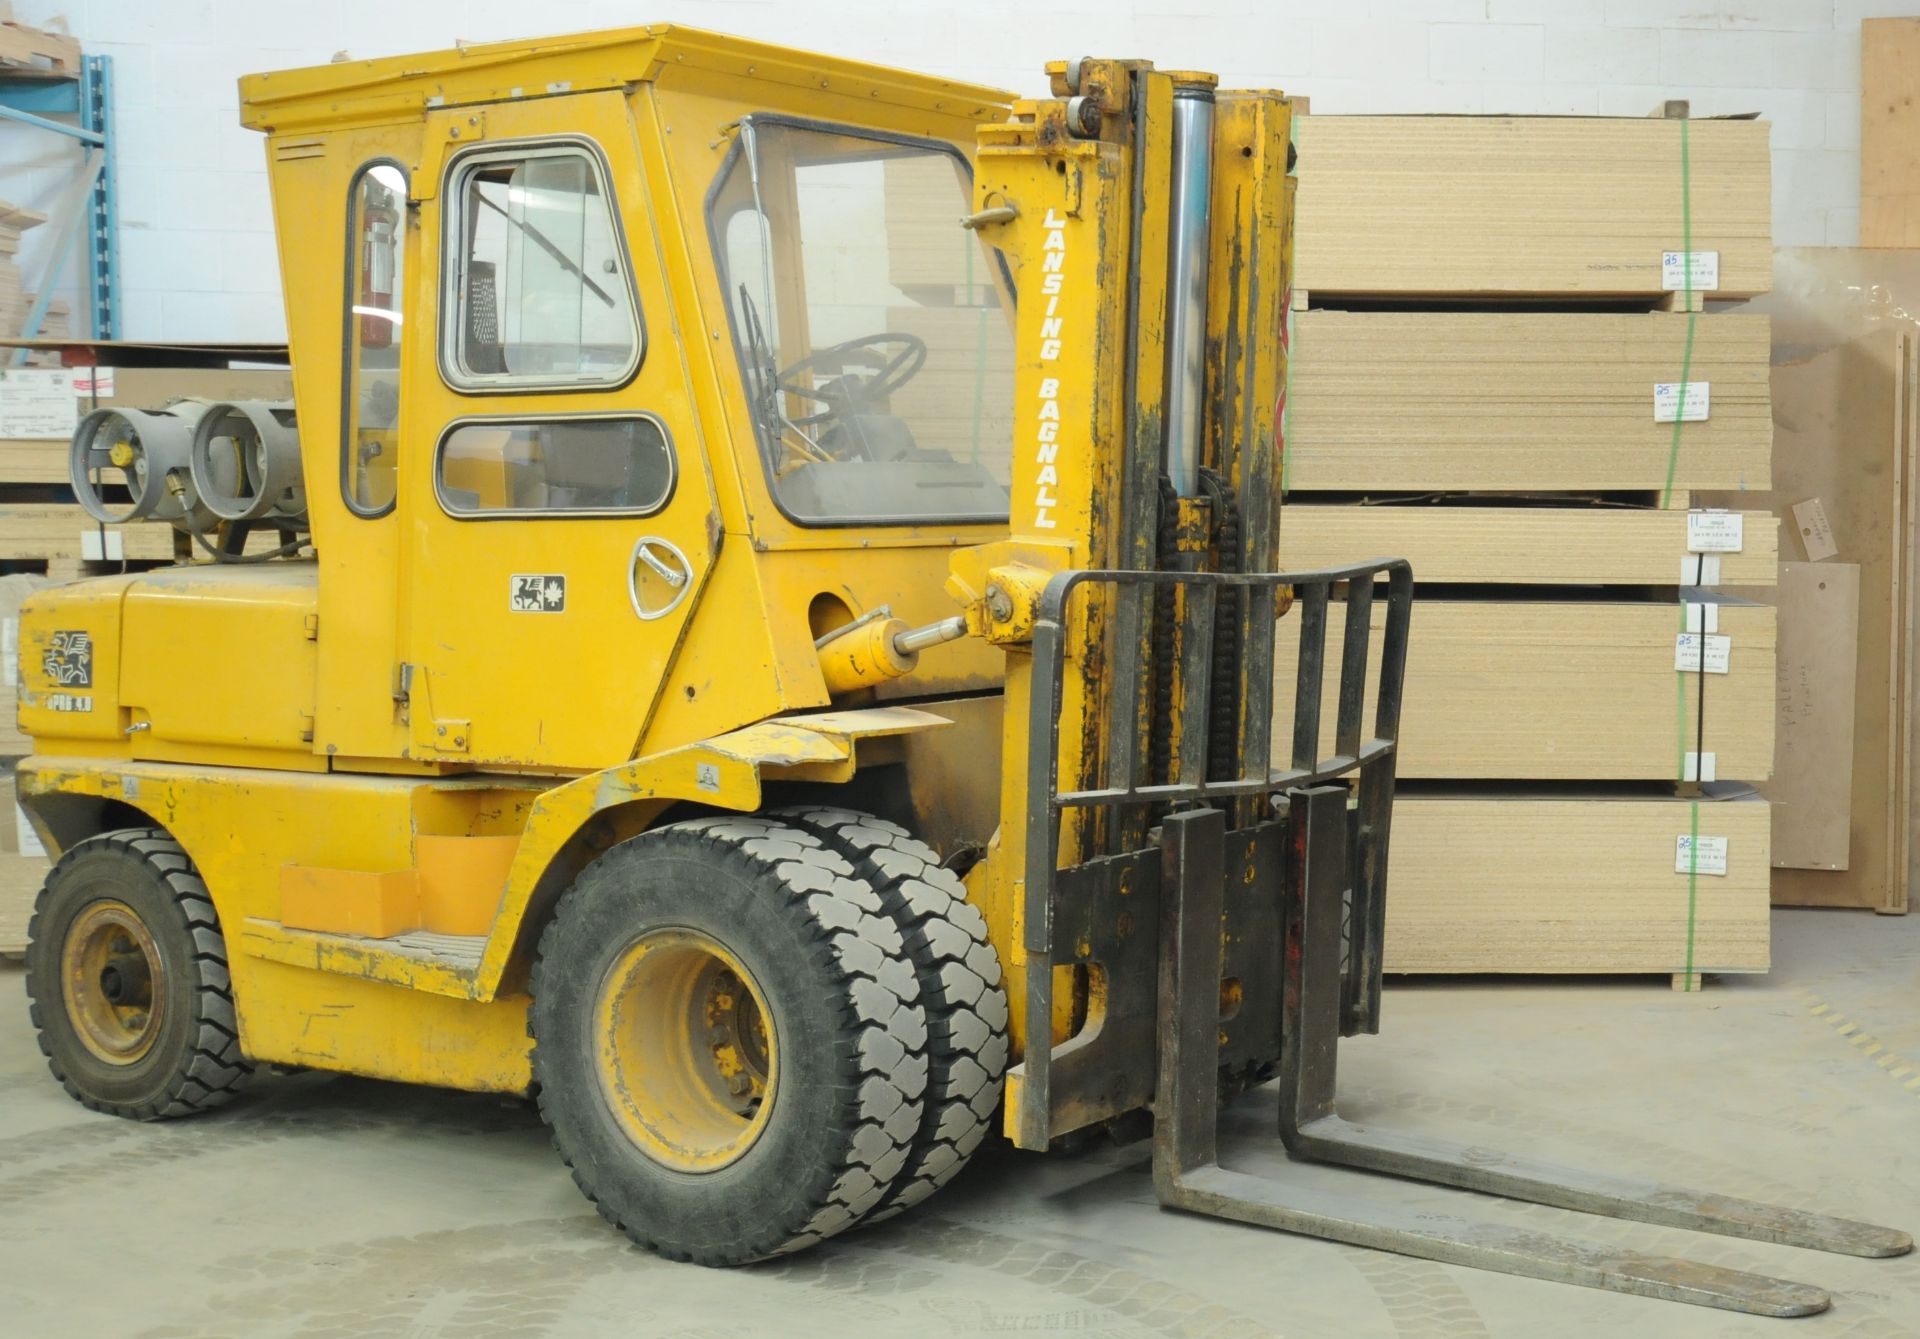 LANSING BAGNALL FOPR6 4.0 LPG OUTDOOR FORKLIFT WITH 8000 LB. CAPACITY, 185" MAX. LIFT HEIGHT,